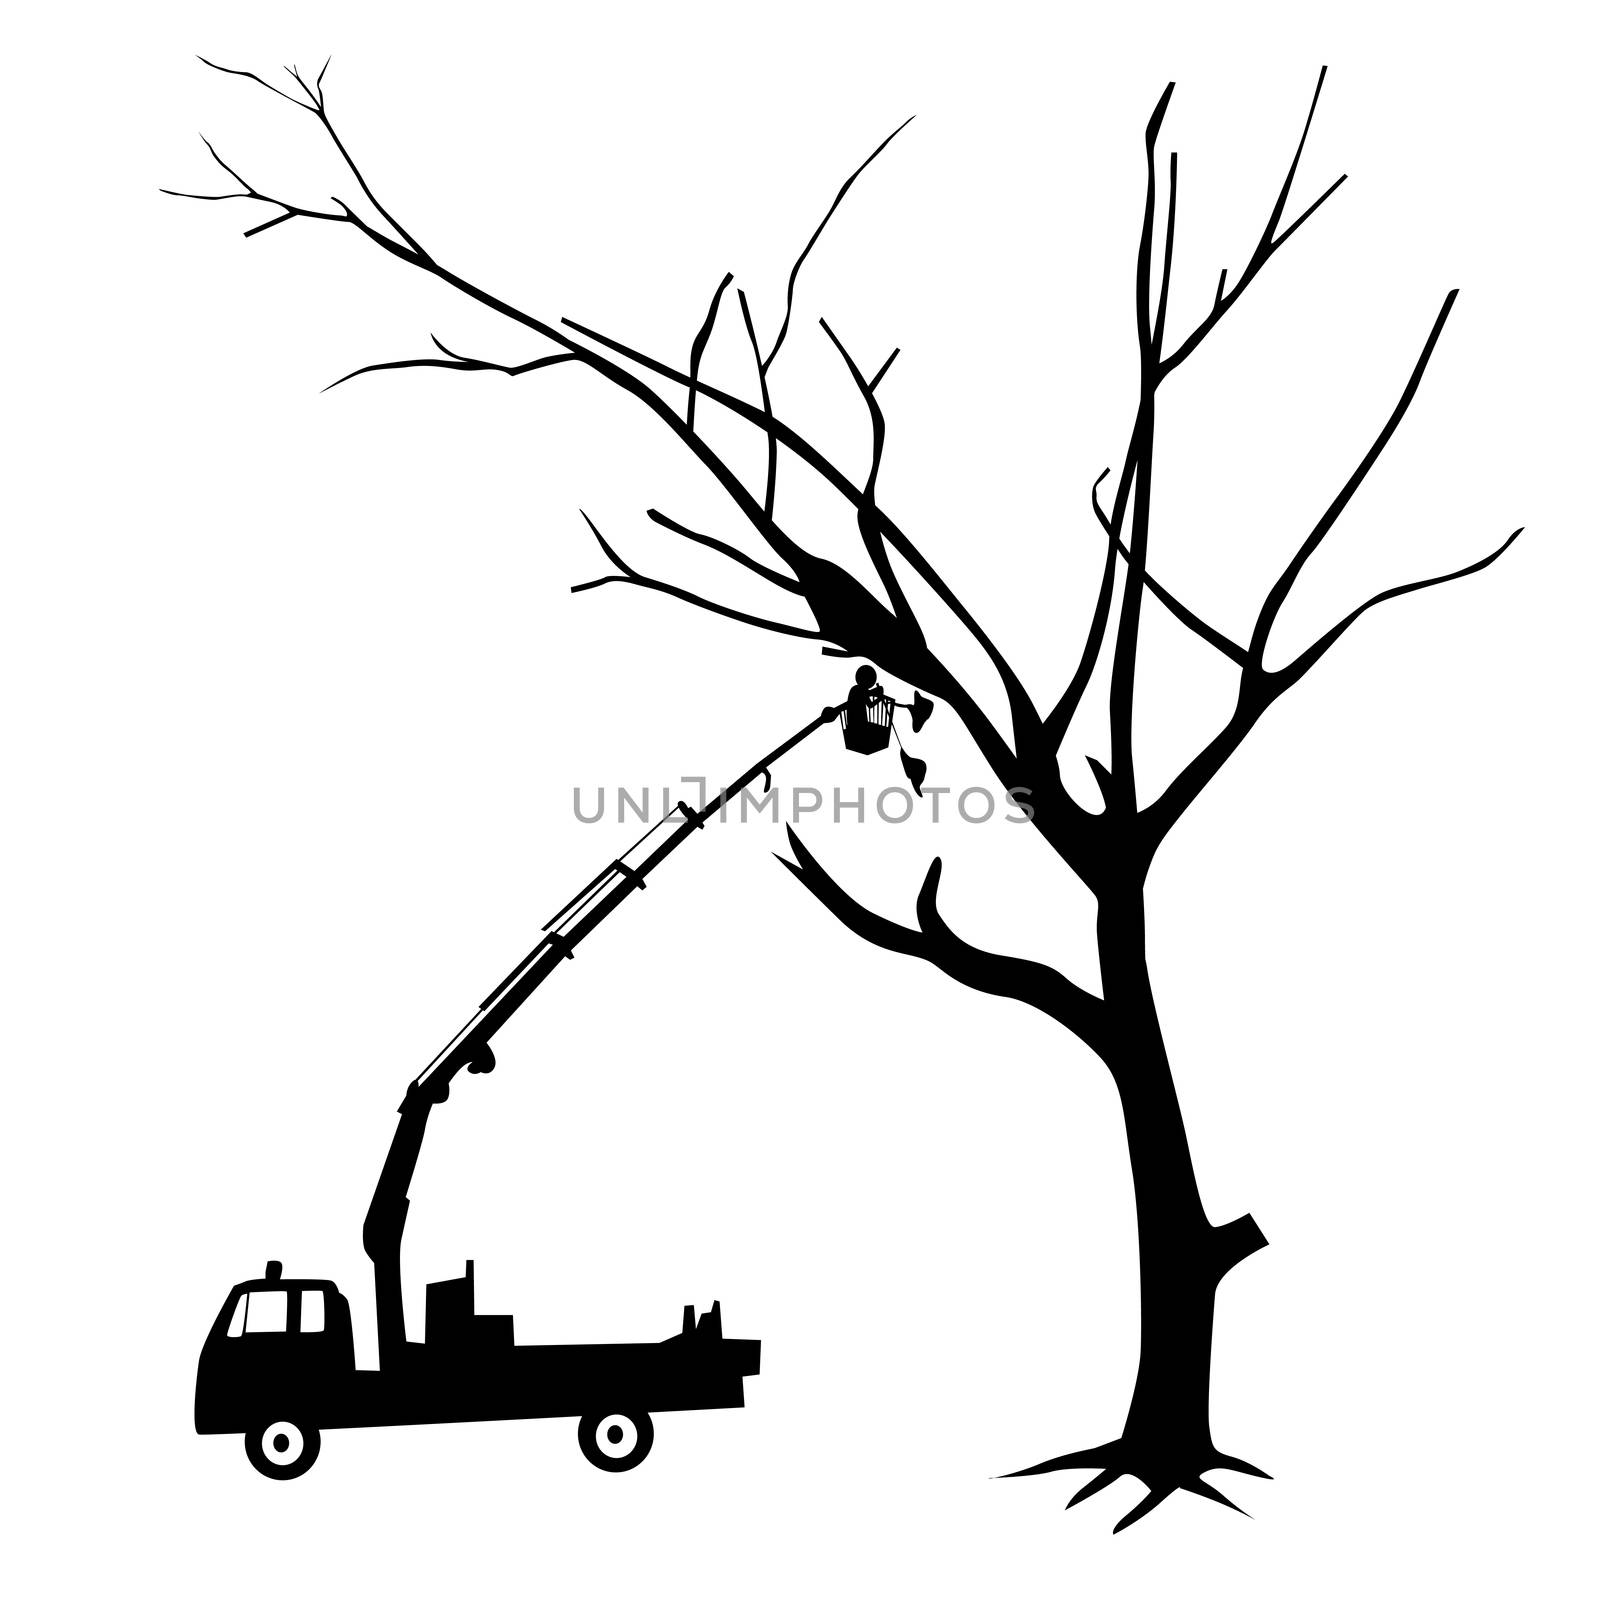 Silhouettes of vector illustration cutting tree isolated on a white background